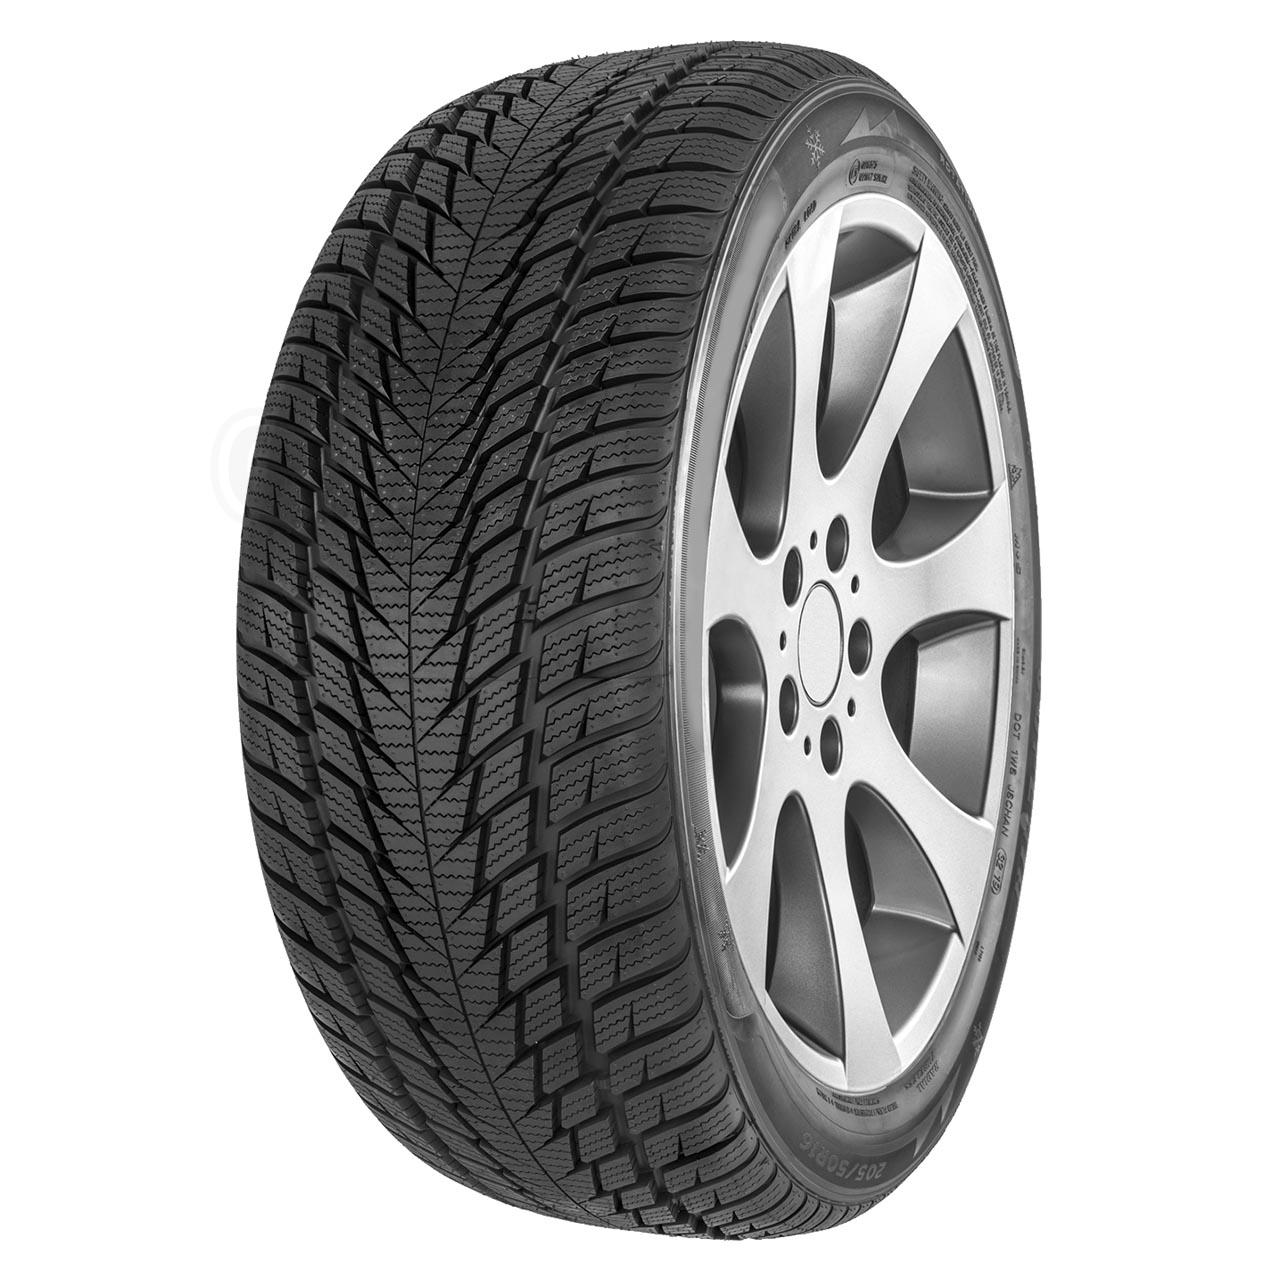 Fortuna Gowin UHP 2 225/45R18 95V XL